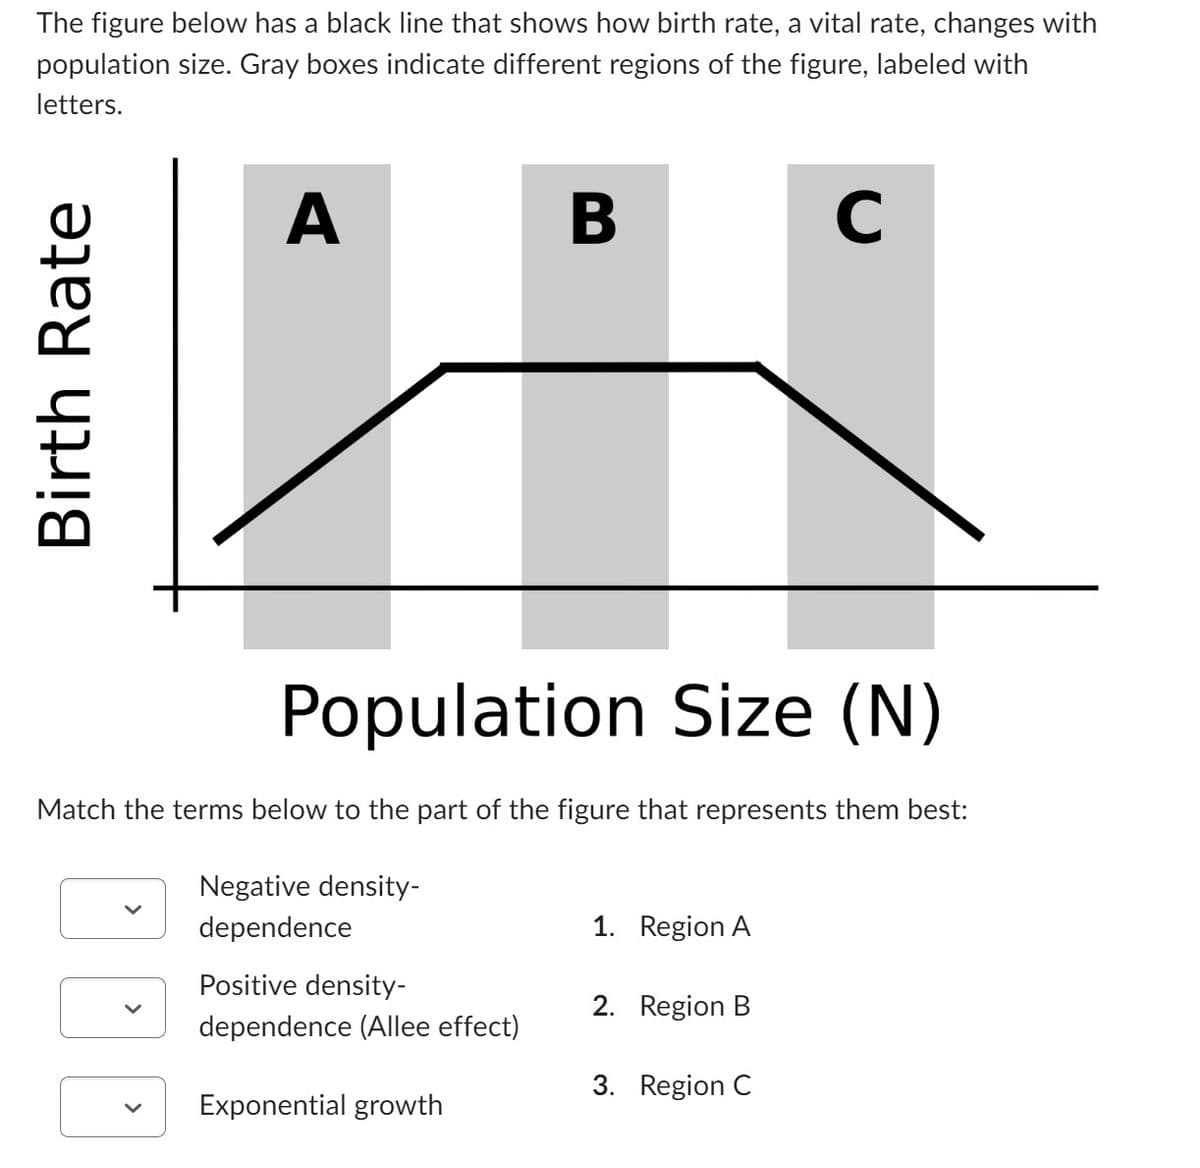 The figure below has a black line that shows how birth rate, a vital rate, changes with
population size. Gray boxes indicate different regions of the figure, labeled with
letters.
Birth Rate
A
Population Size (N)
Negative density-
dependence
B
Match the terms below to the part of the figure that represents them best:
Positive density-
dependence (Allee effect)
C
H
Exponential growth
1. Region A
2. Region B
3. Region C